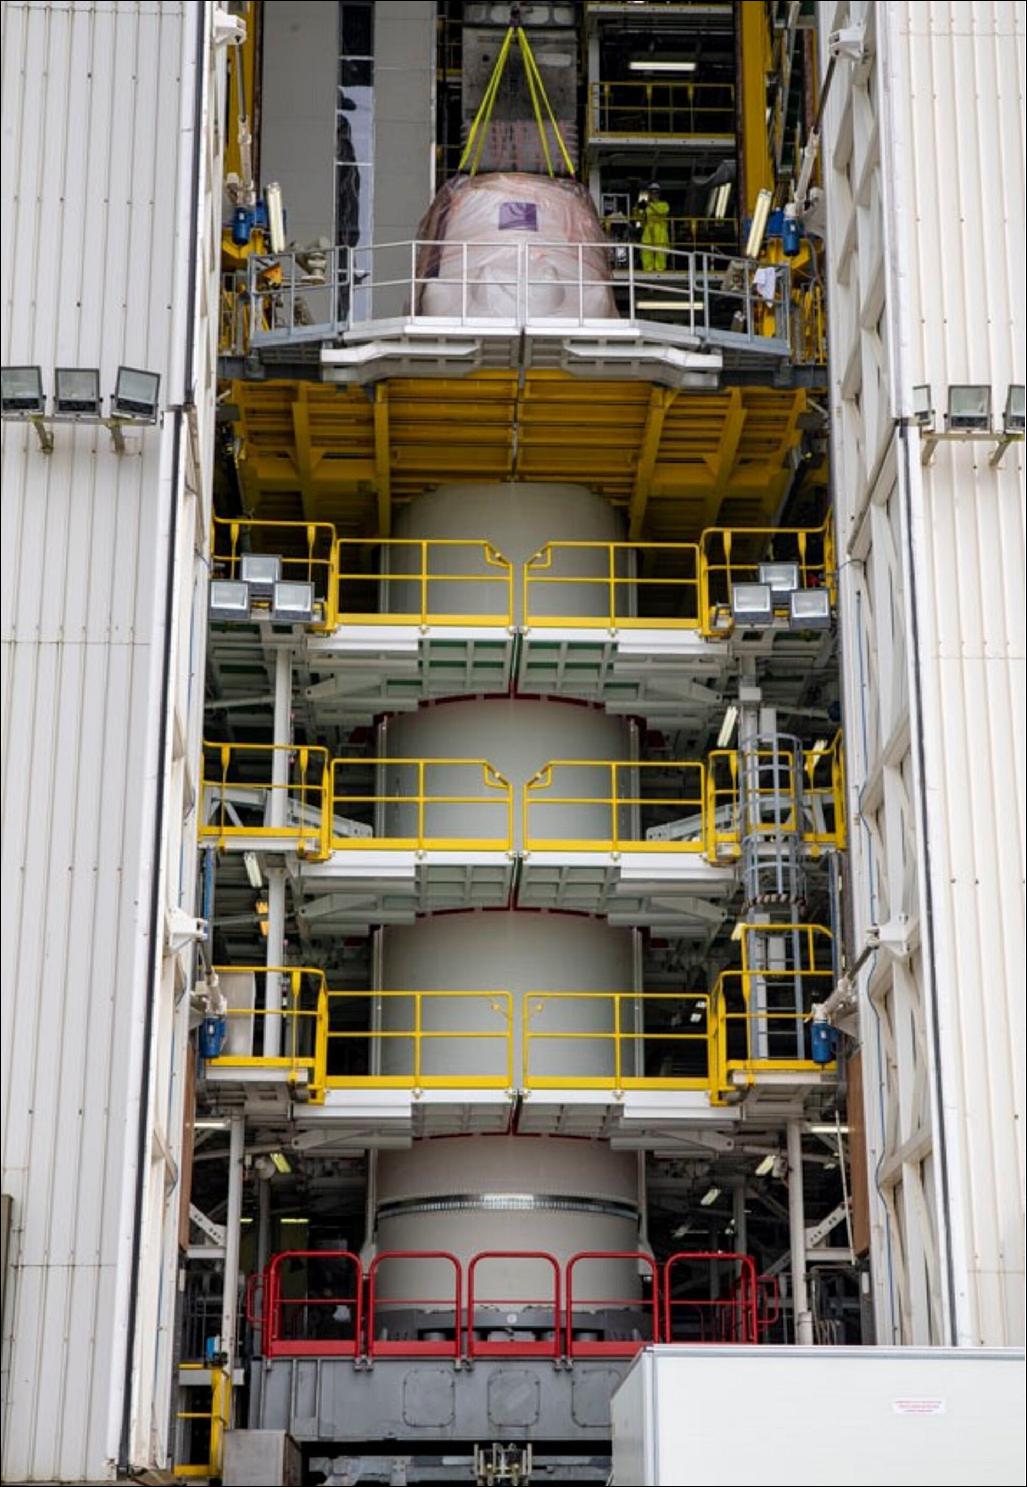 Figure 11: VV21 1-2 interstage integration. The Vega-C Interstage 1/2 has now been transferred to and integrated at the Vega Launch Zone (Zone de Lancement Vega) ZLV at Europe's Spaceport in Kourou, French Guiana on 22 April 2022 (image credit: ESA/CNES/Arianespace/Optique video du CSG/P Baudon)